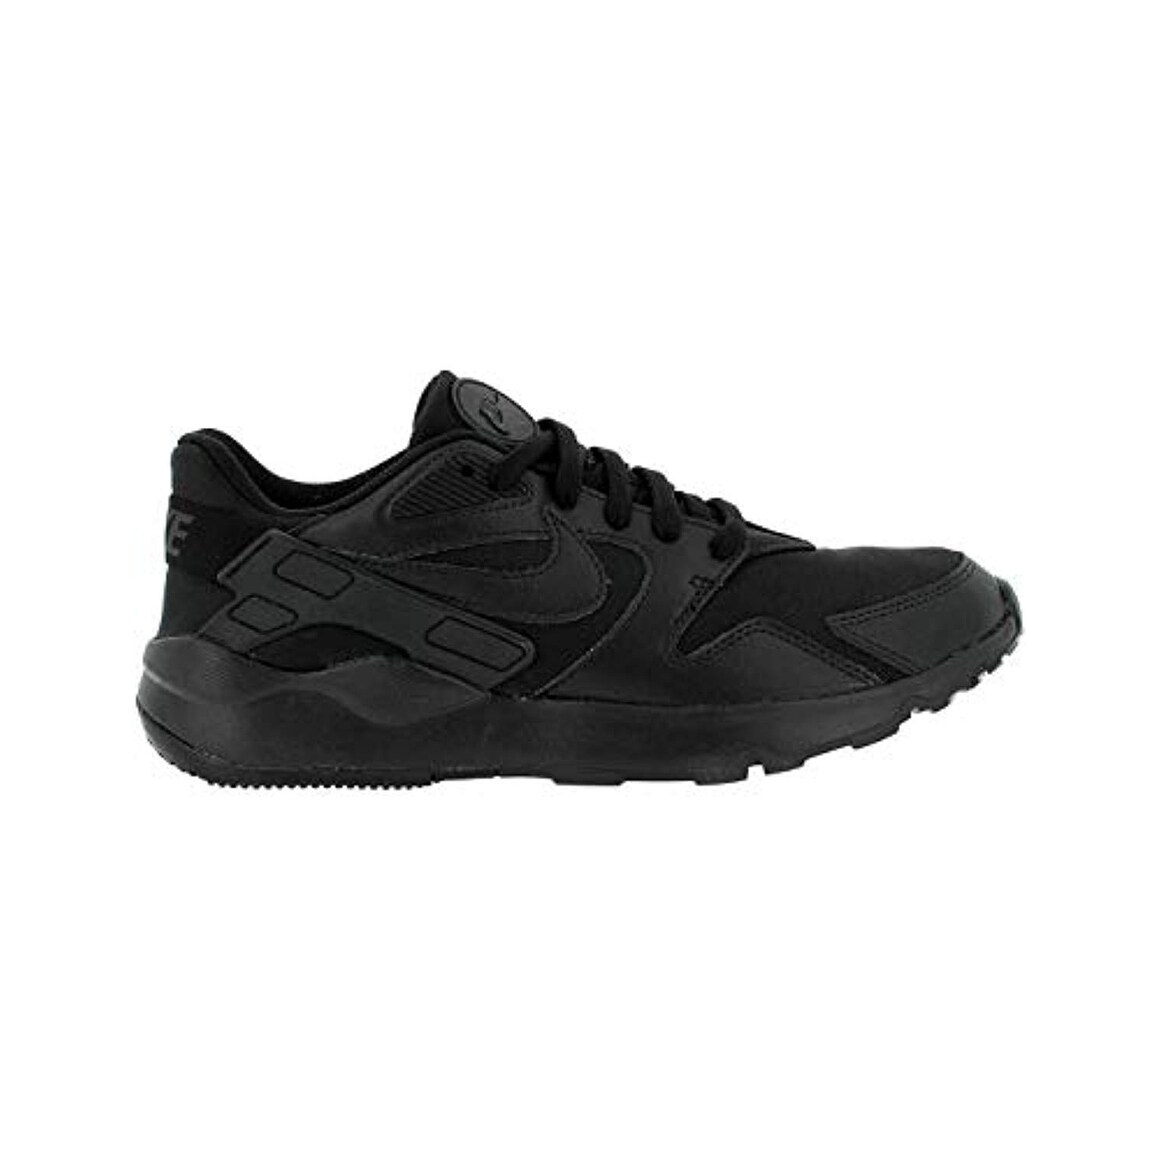 Nike - Ld Victory - At4249003 - Size 